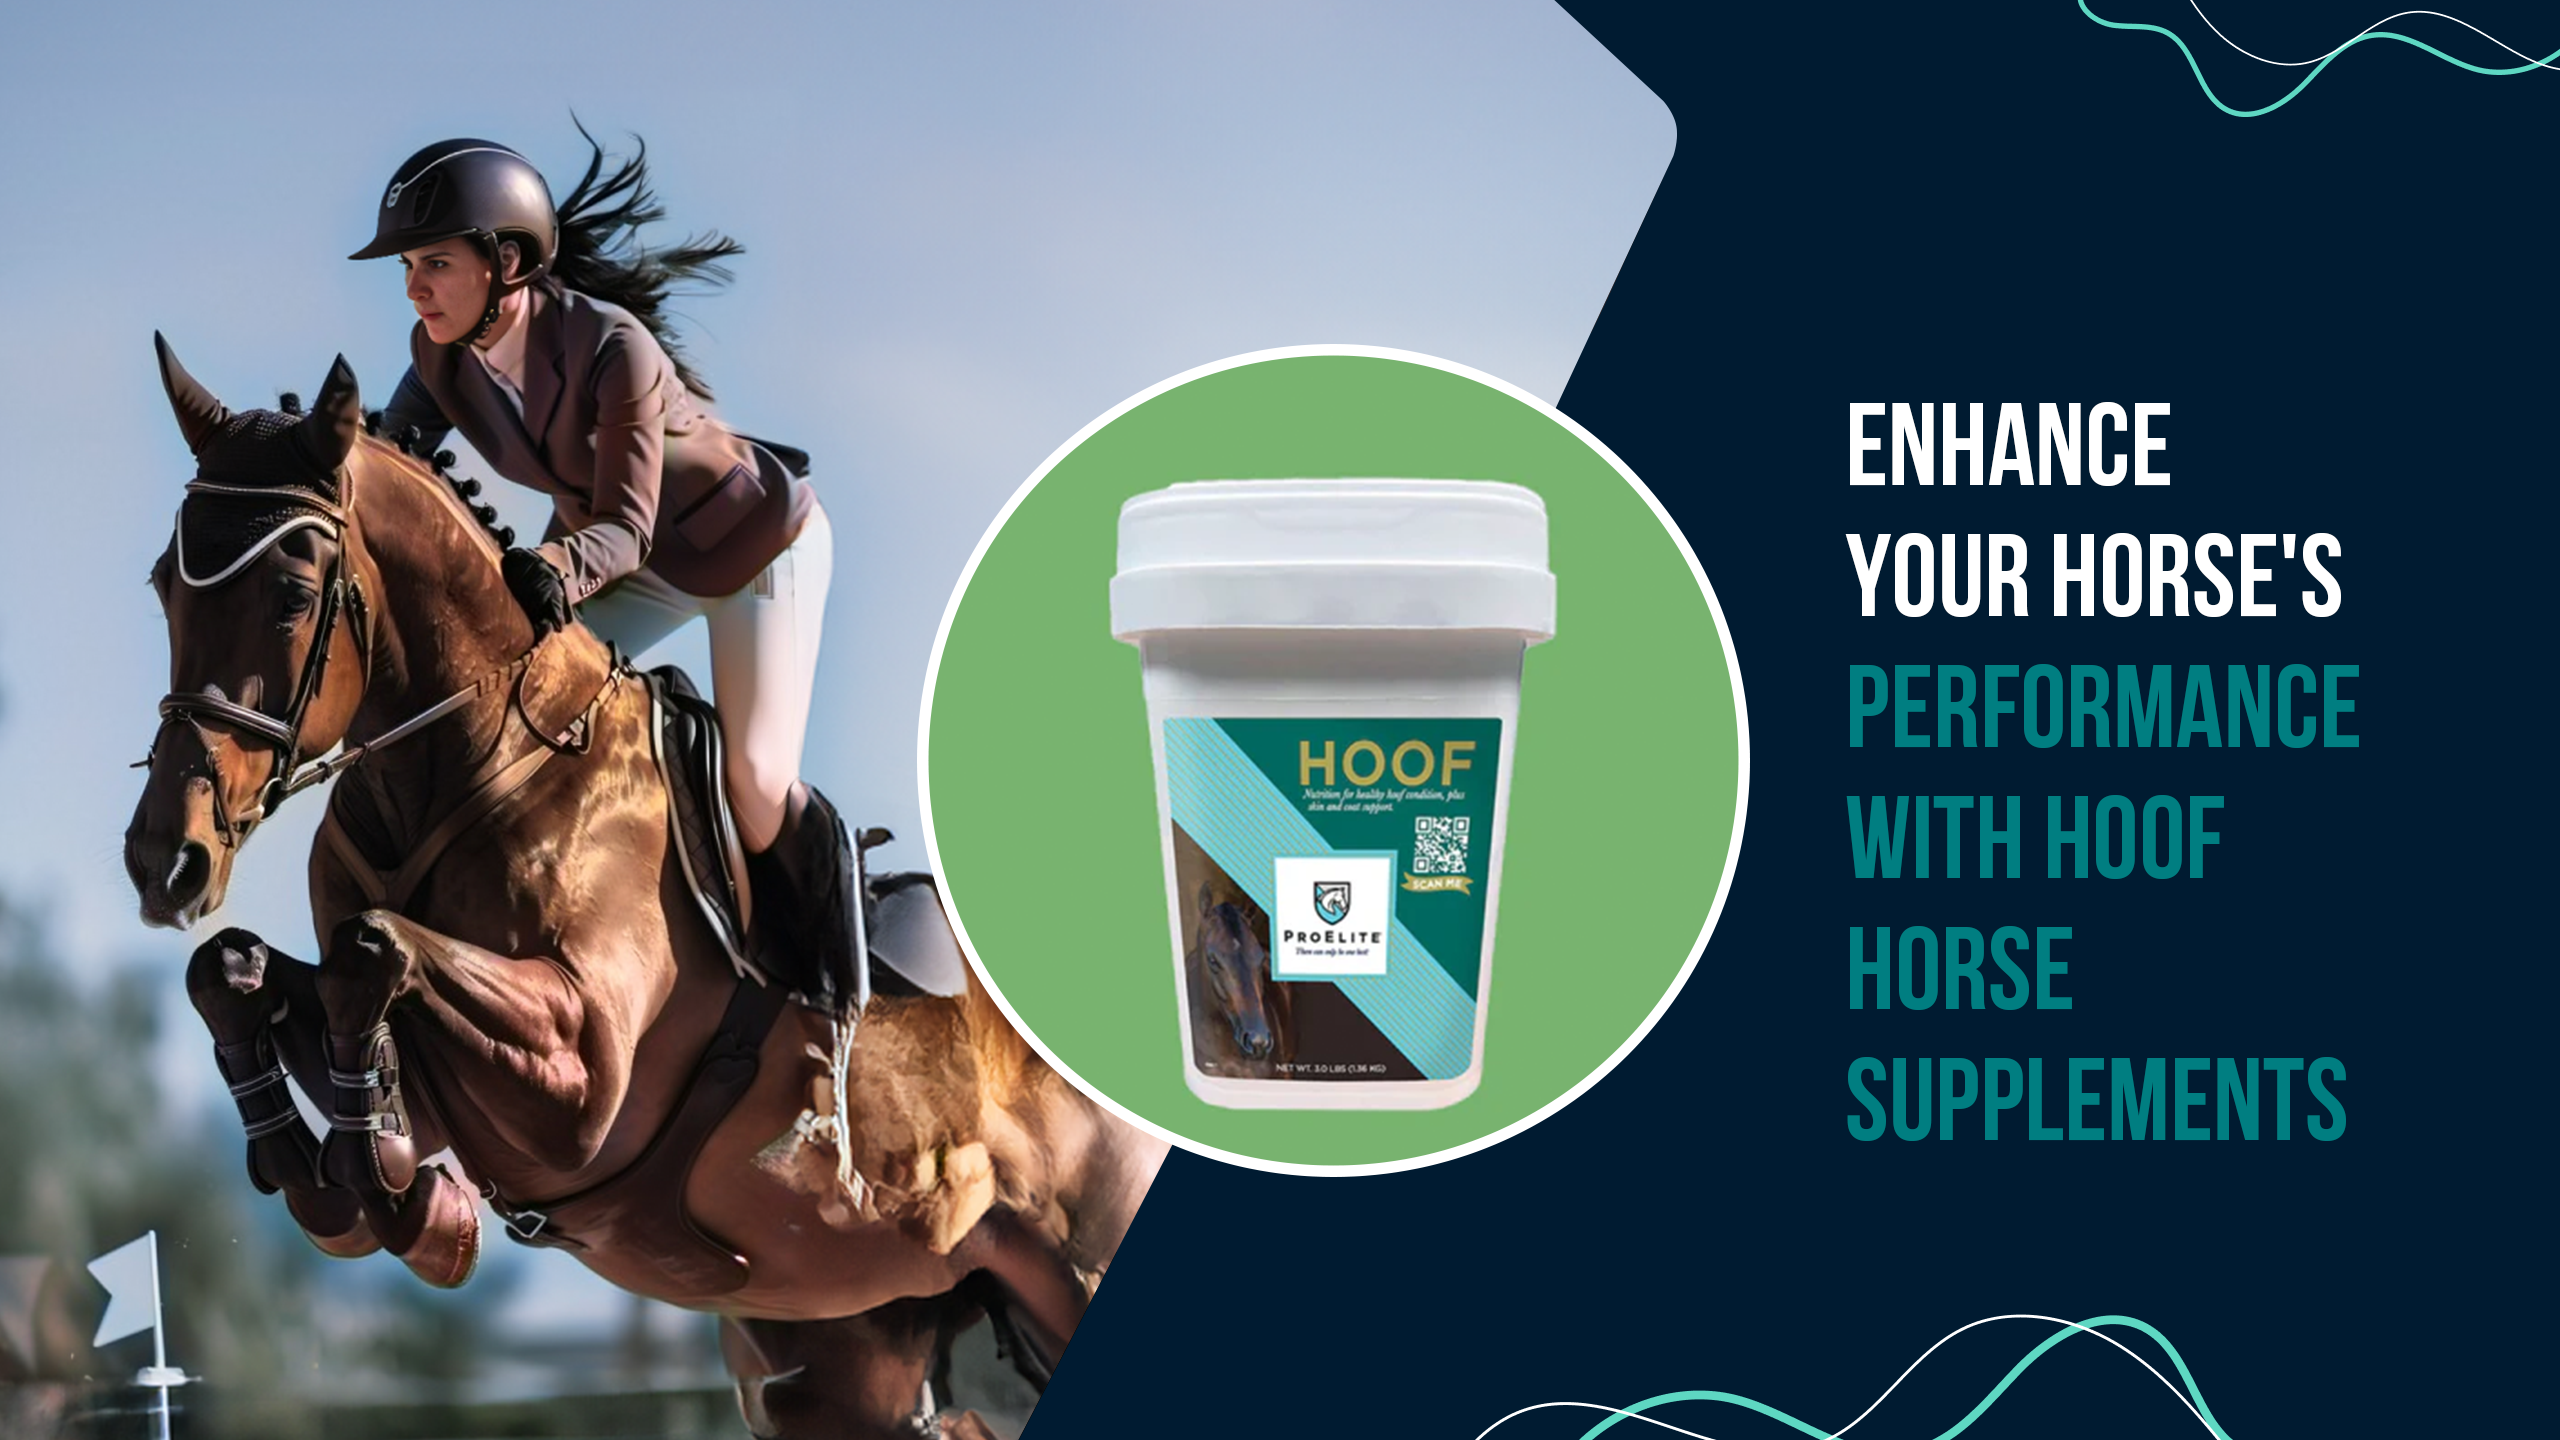 Enhance Your Horse's Performance with Hoof Horse Supplements